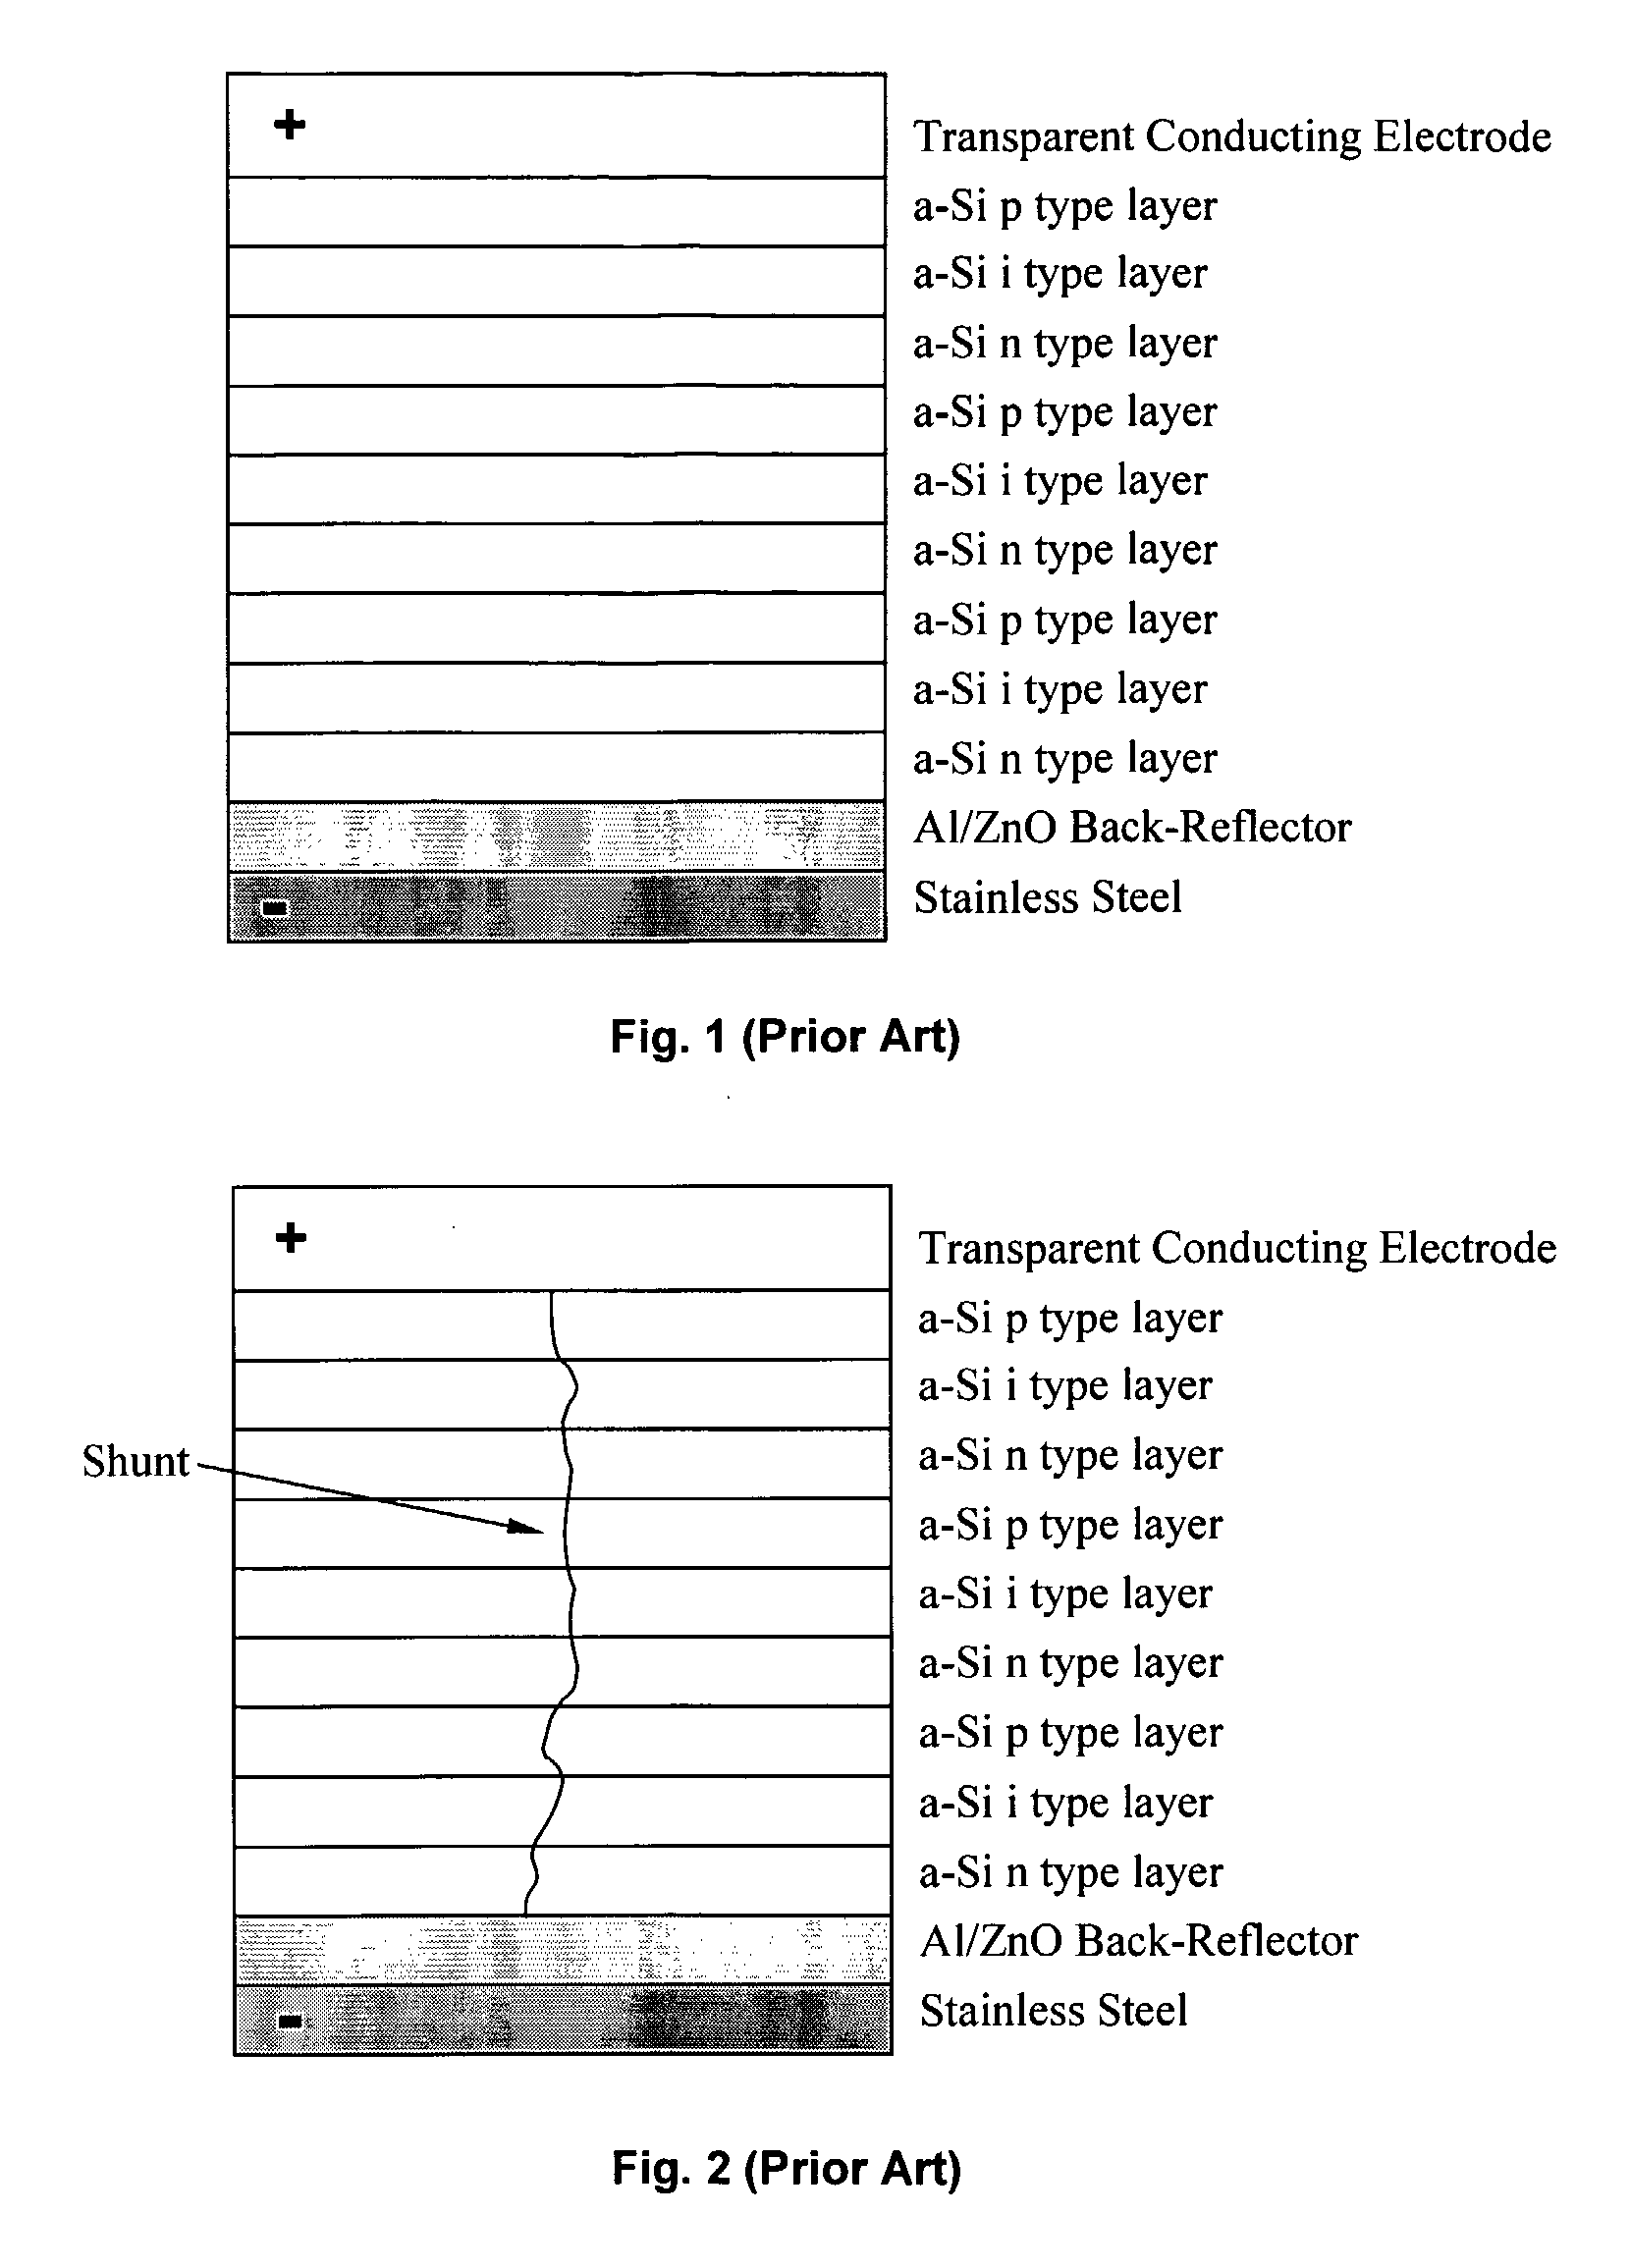 Light-Assisted Electrochemical Shunt Passivation for Photovoltaic Devices